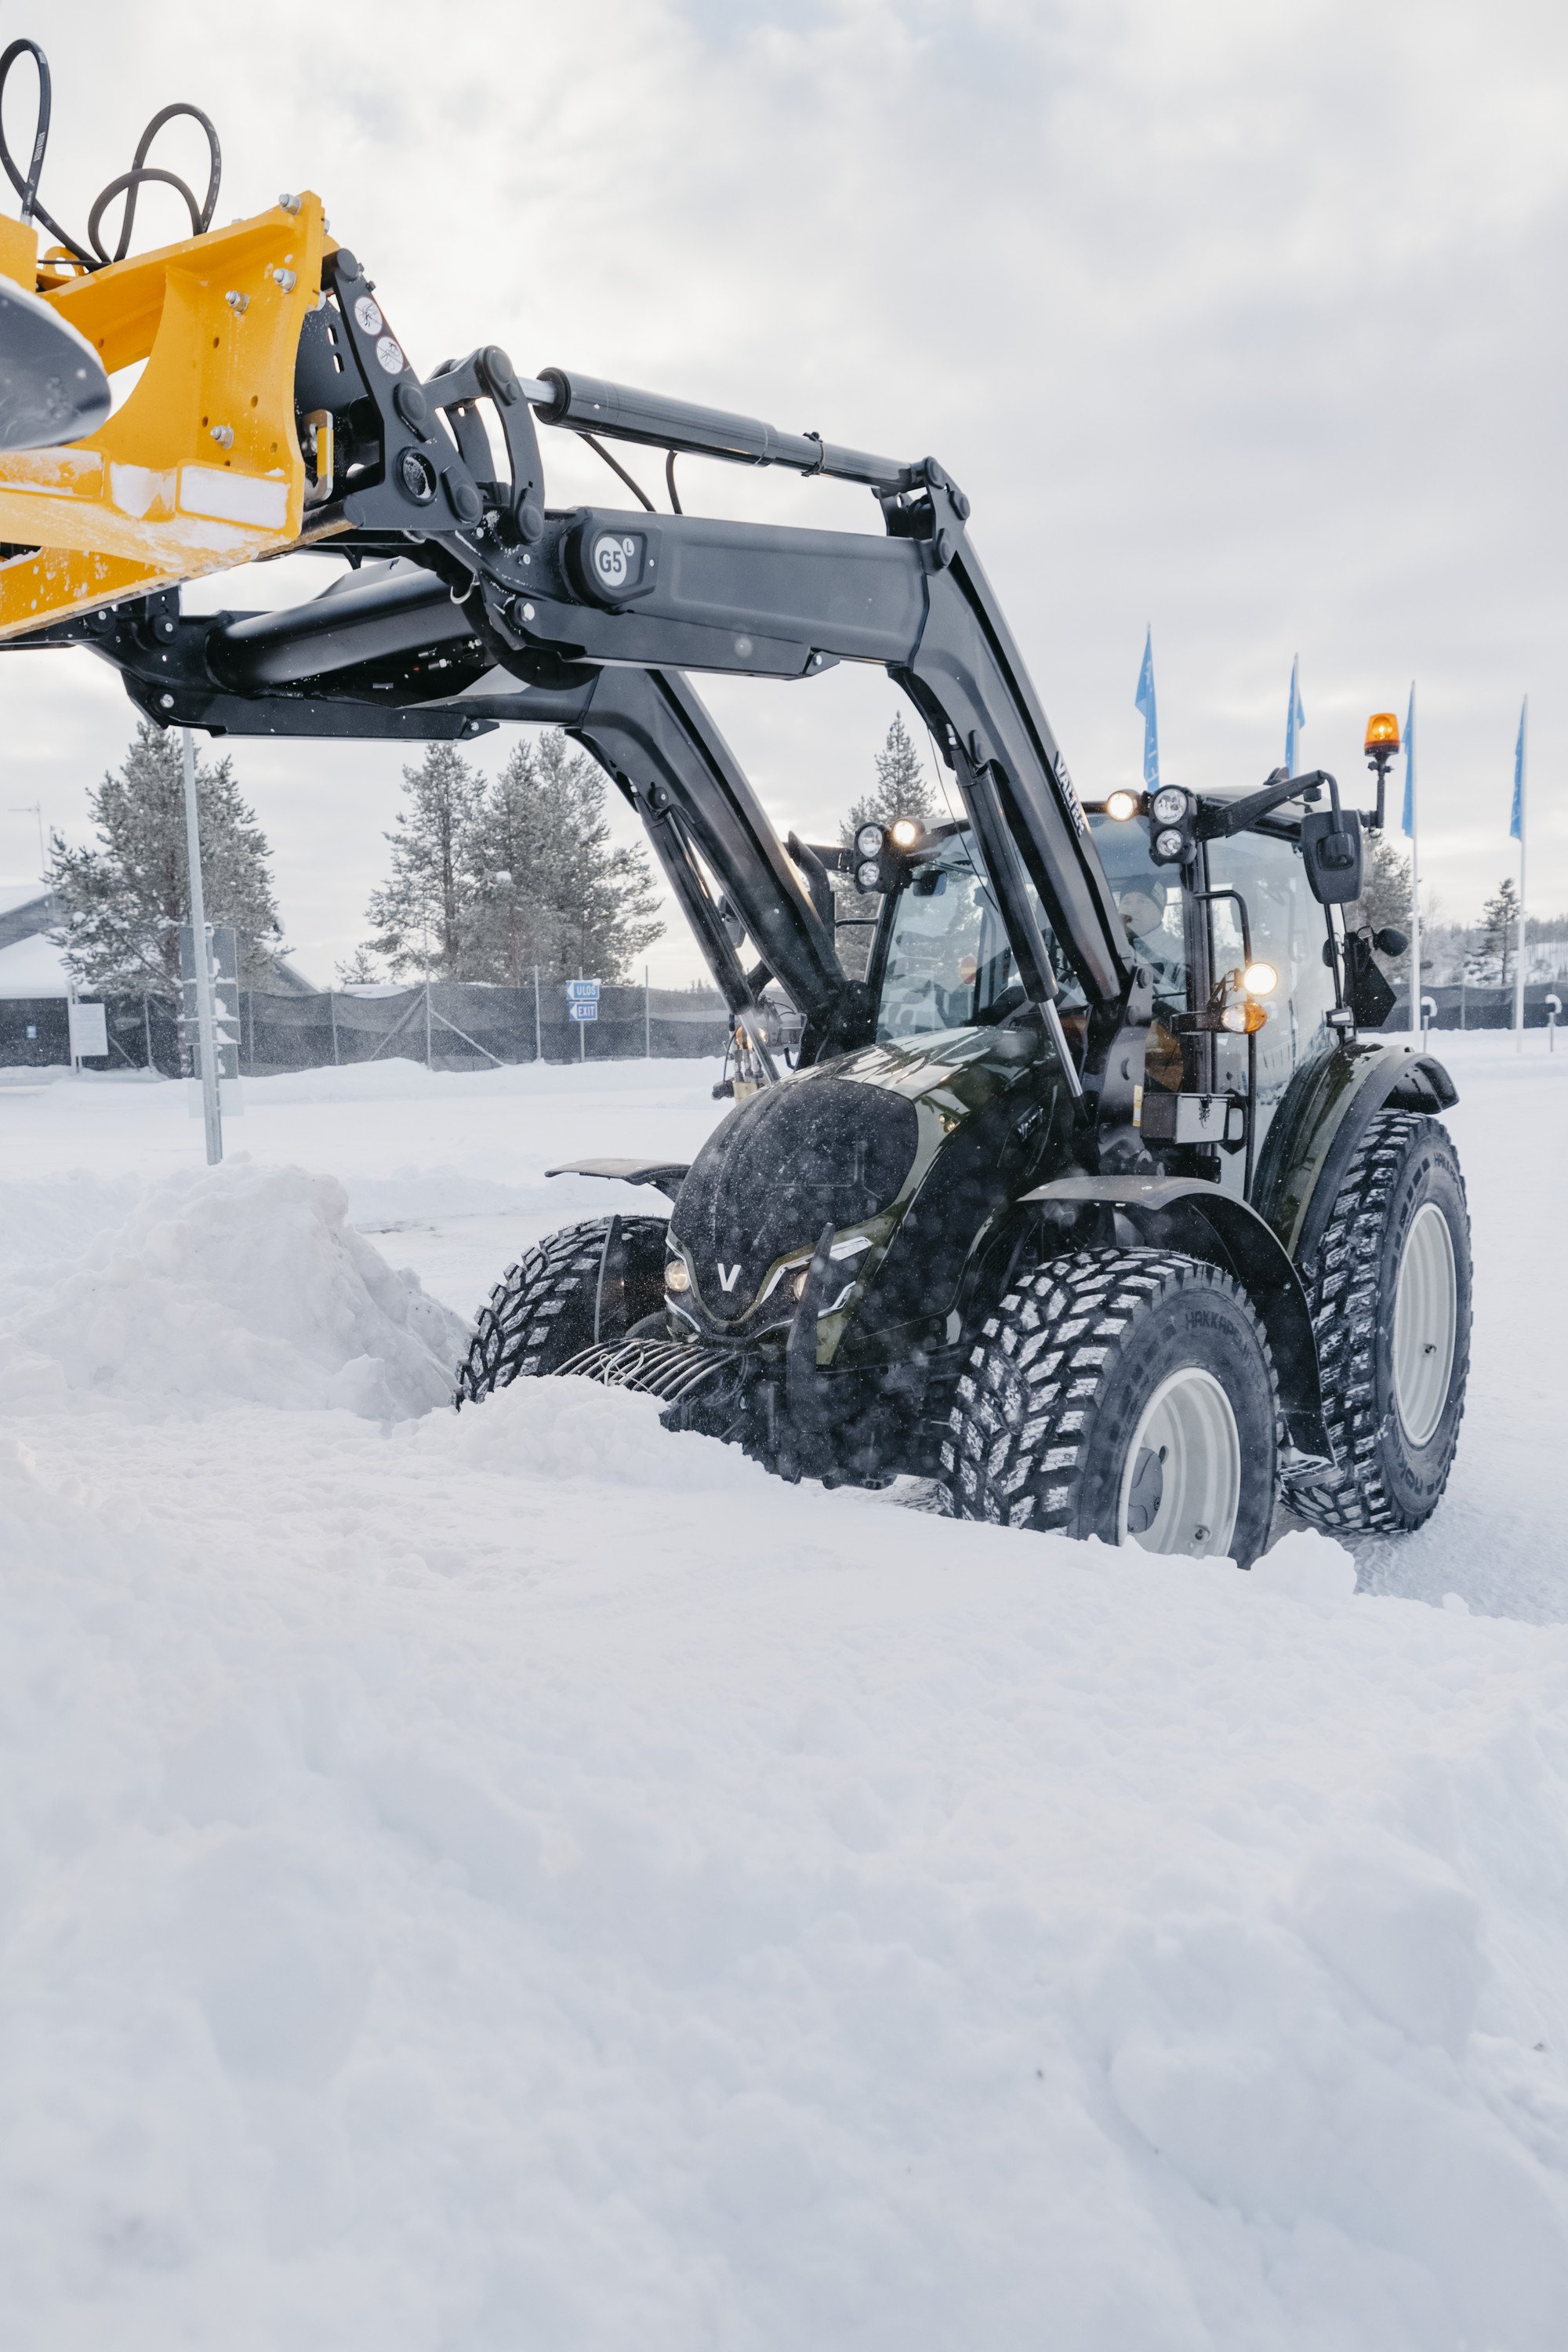 valtra-a-105-green-front-loader-plowing-winter-ivalo-2021-img-1516-hires_177334.jpg